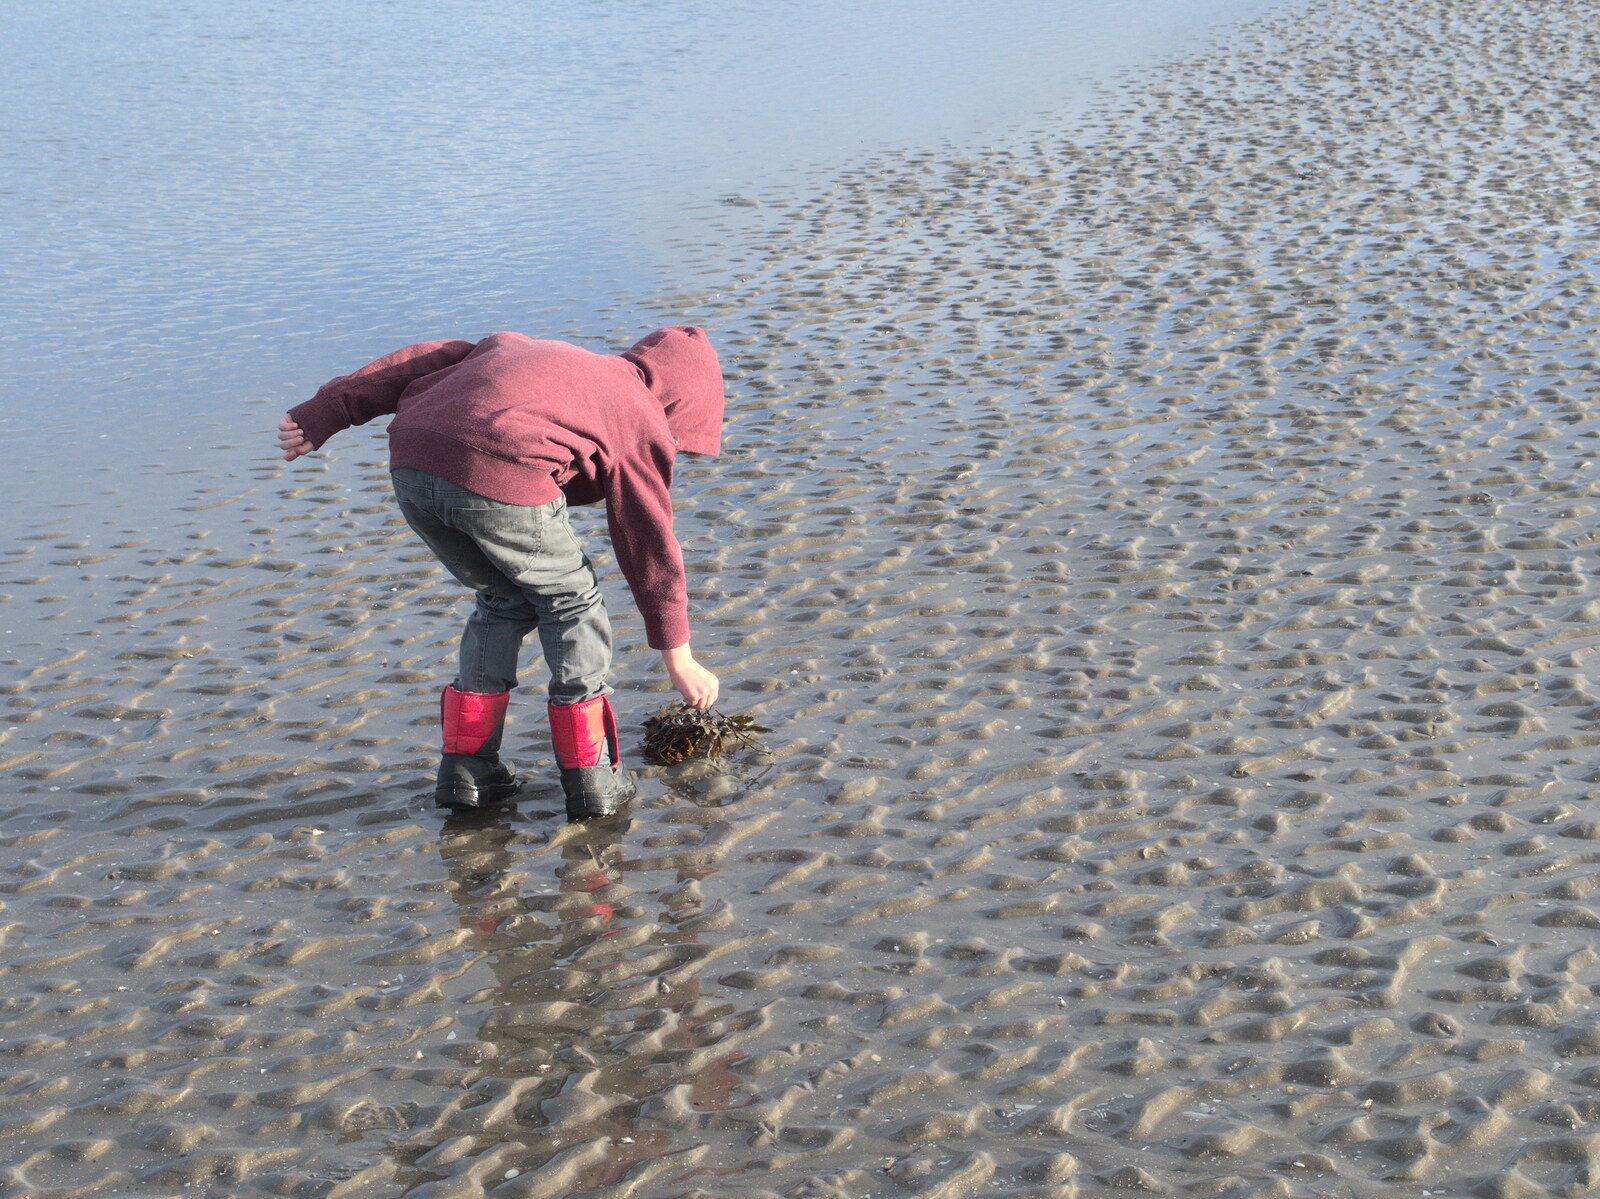 Fred picks some seaweed up from Christmas Eve in Dublin and Blackrock, Ireland - 24th December 2015